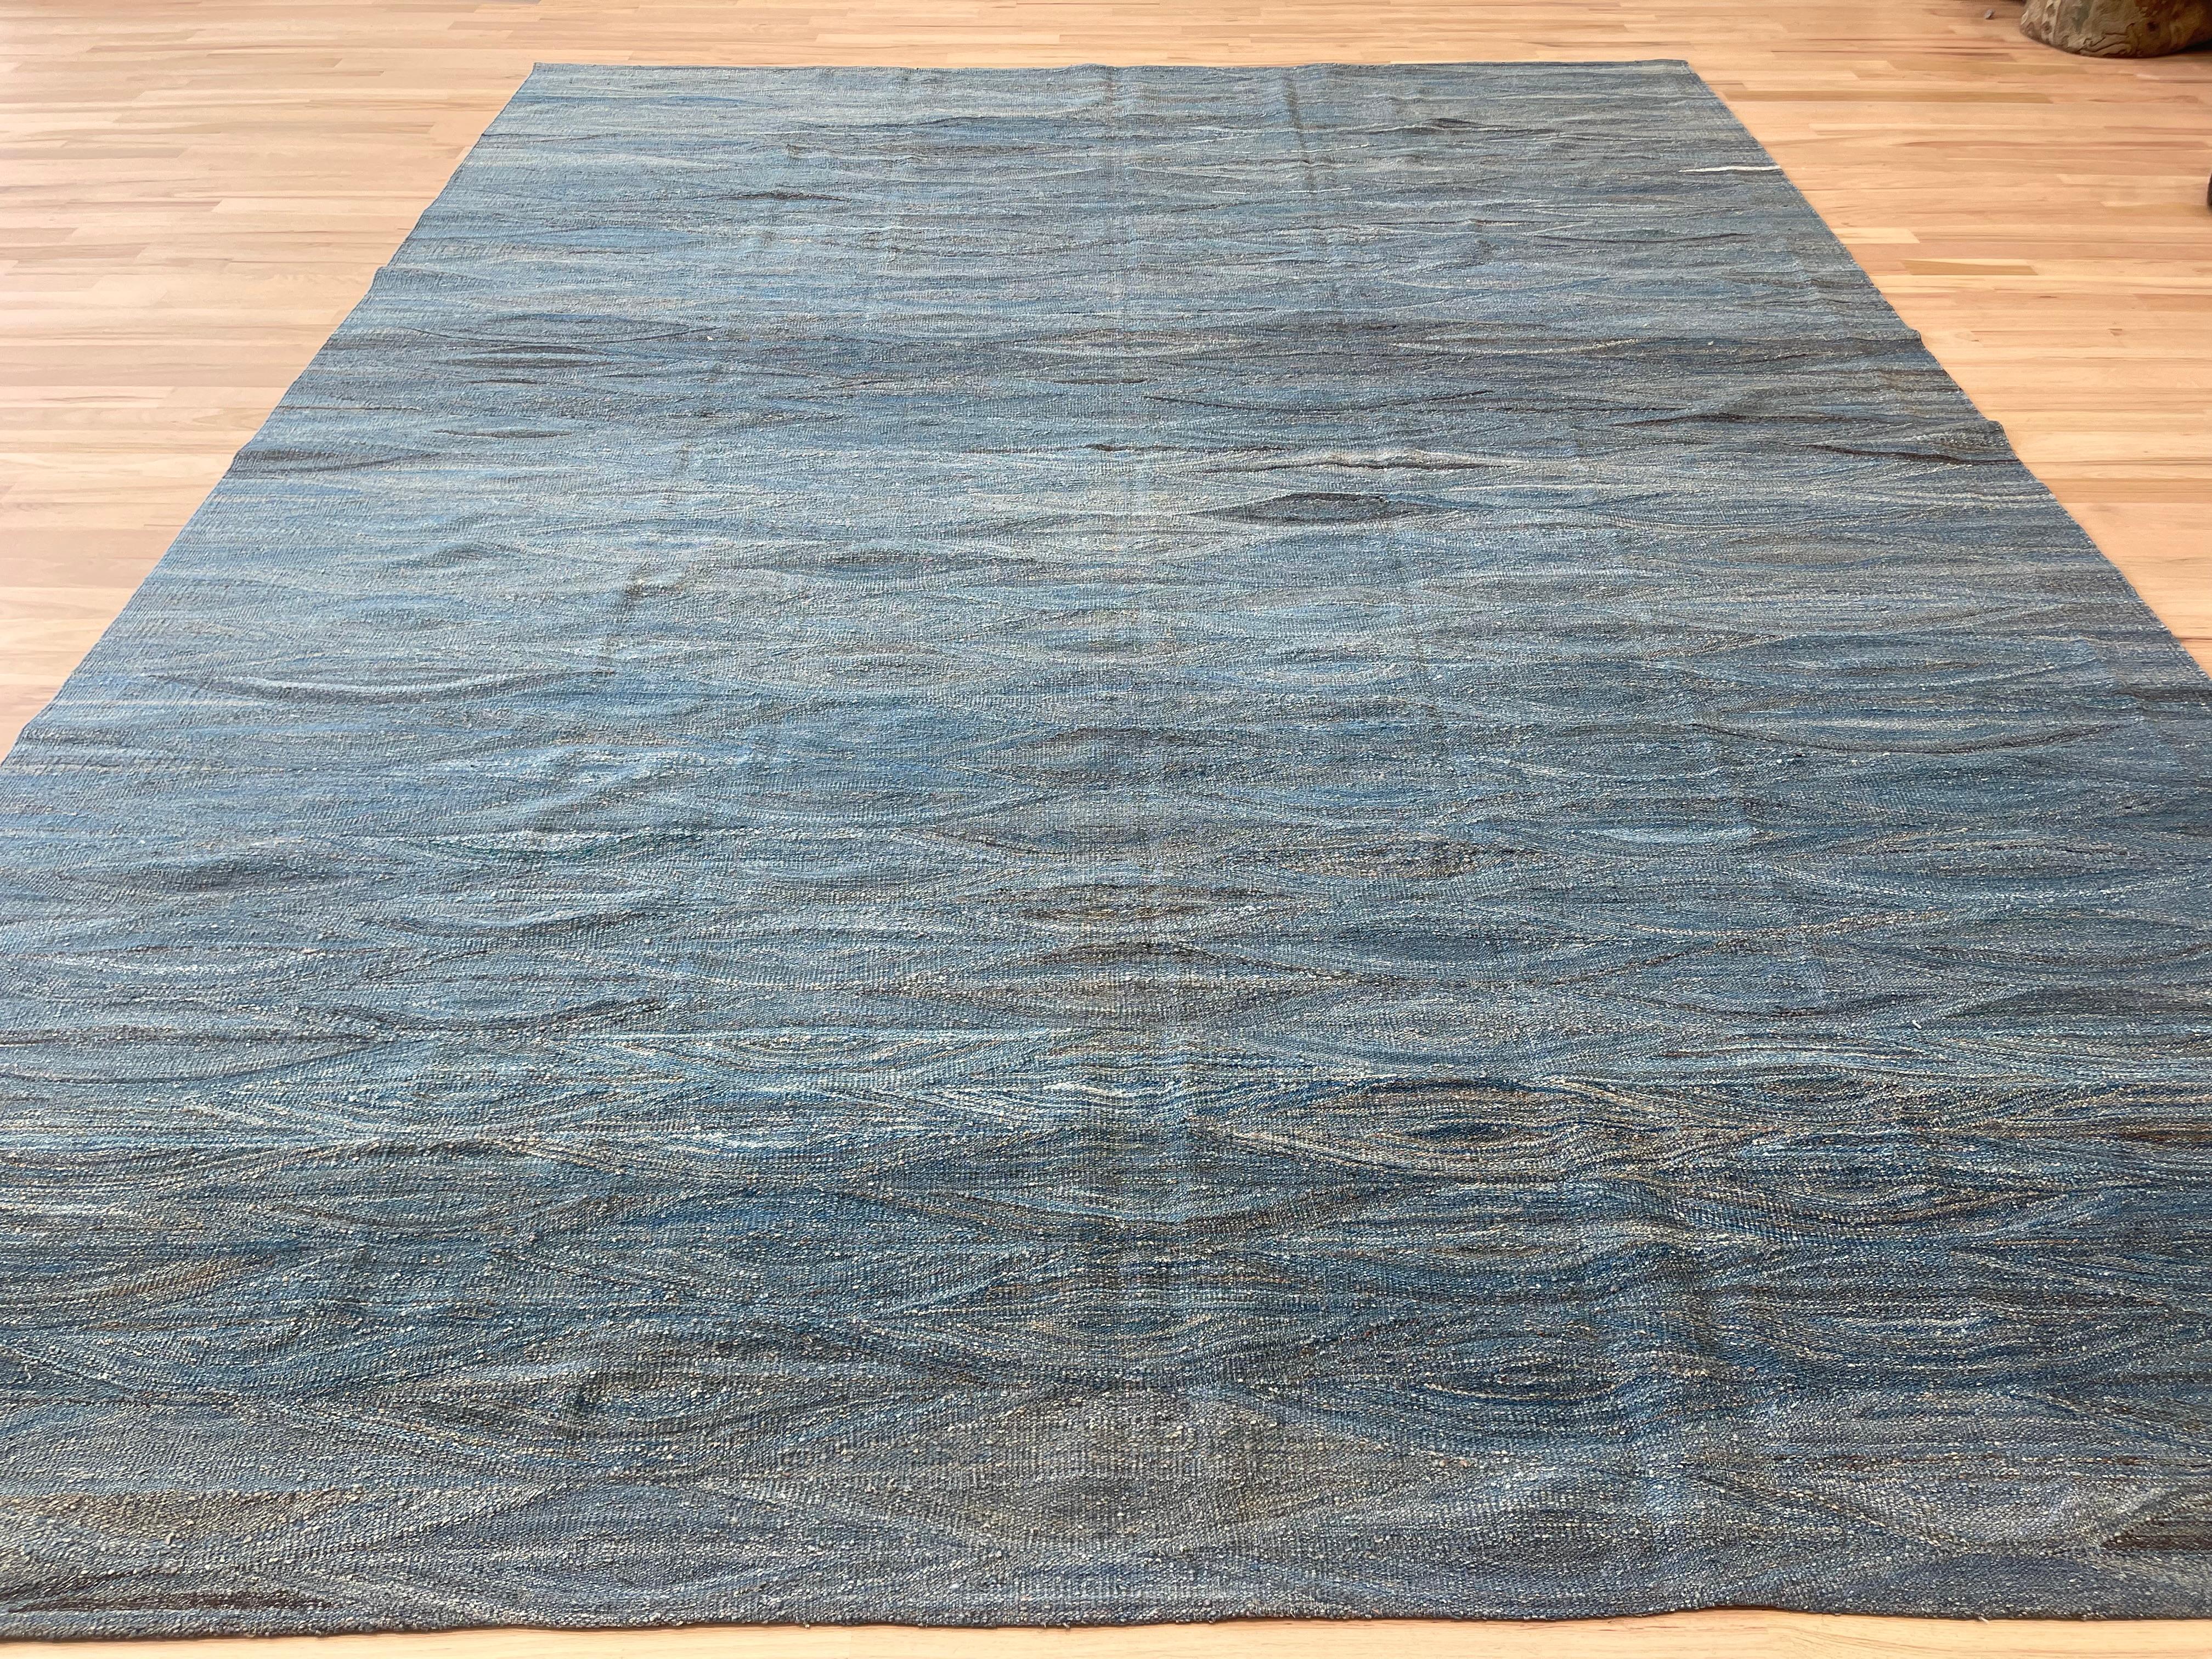 Elevate your home decor with our Turkish rug, featuring a stunning  shades of blue. With its reversible use, this rug offers versatility and a touch of elegance to any room. Add a pop of color and texture with our high-quality, handcrafted rug.